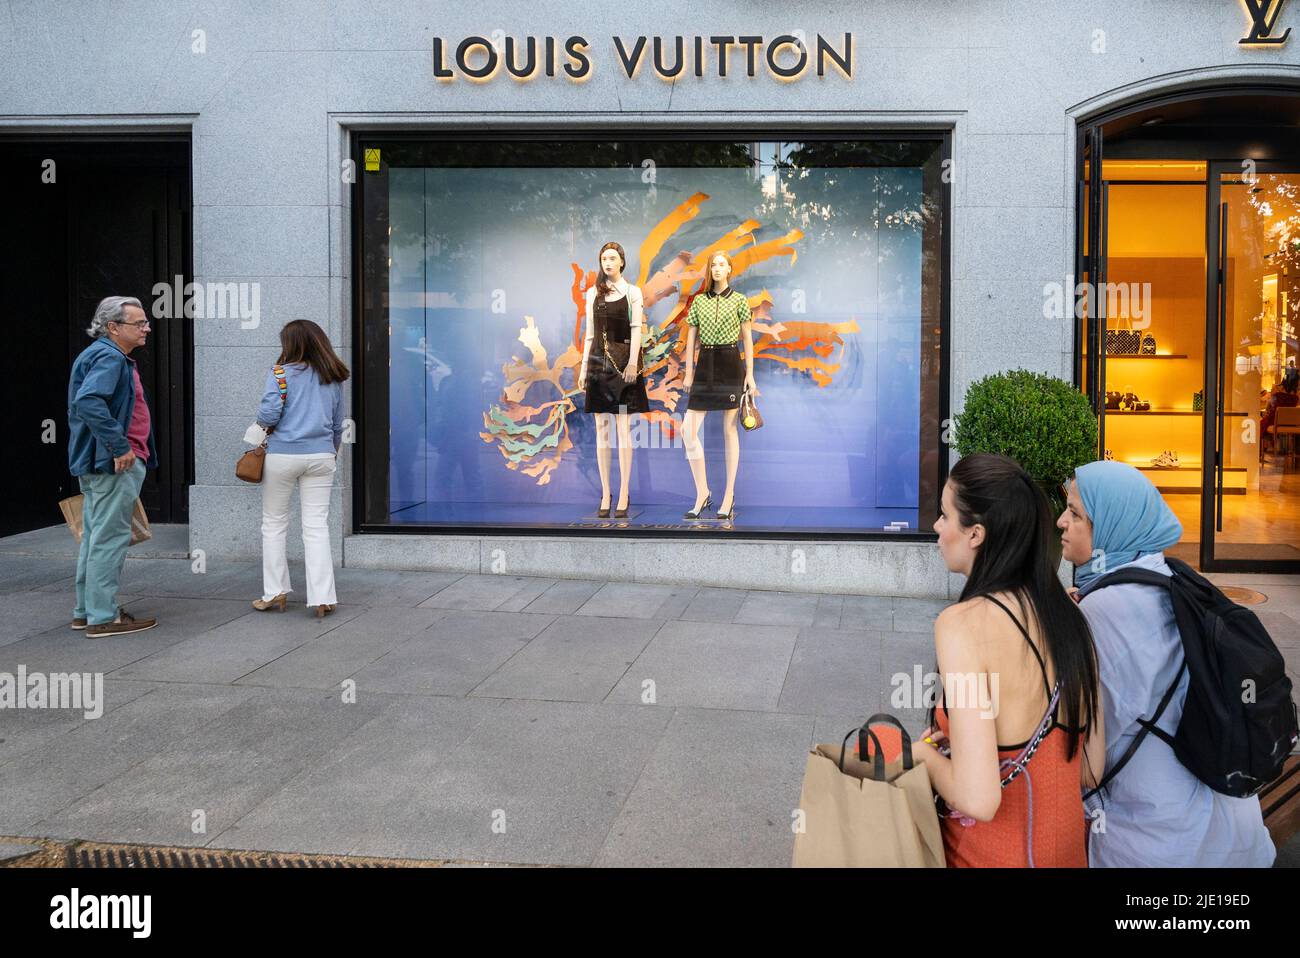 Left: model based on the Louis Vuitton store facade; Top (A-C): the